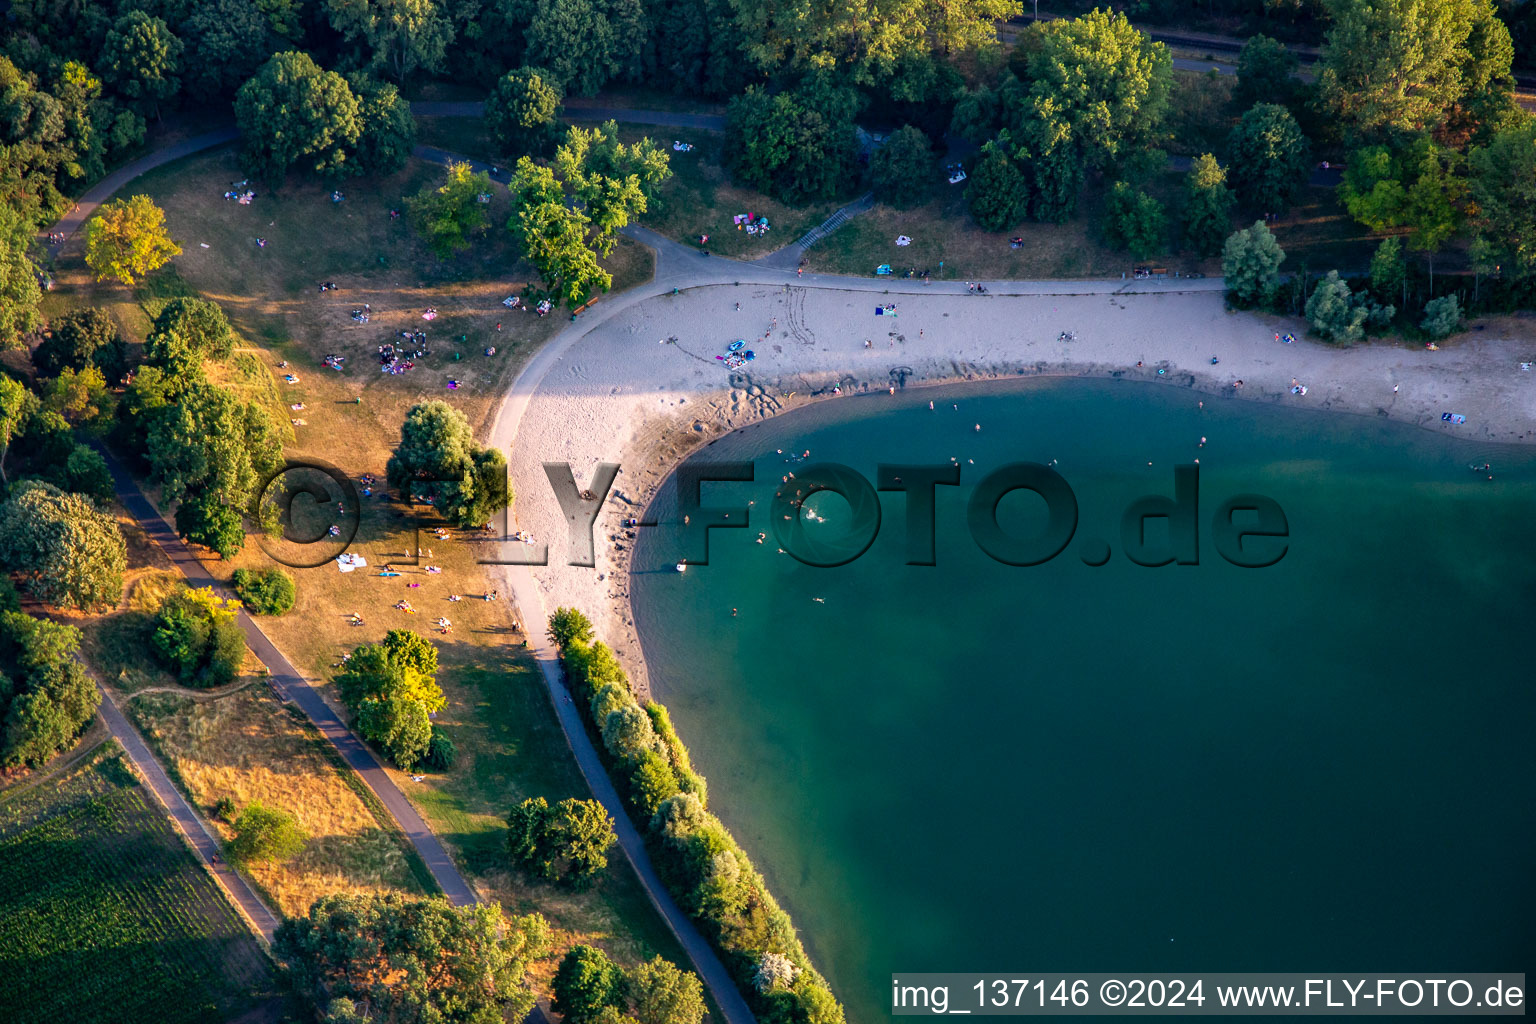 Bathing beach Vogelstang lake in the district Vogelstang in Mannheim in the state Baden-Wuerttemberg, Germany